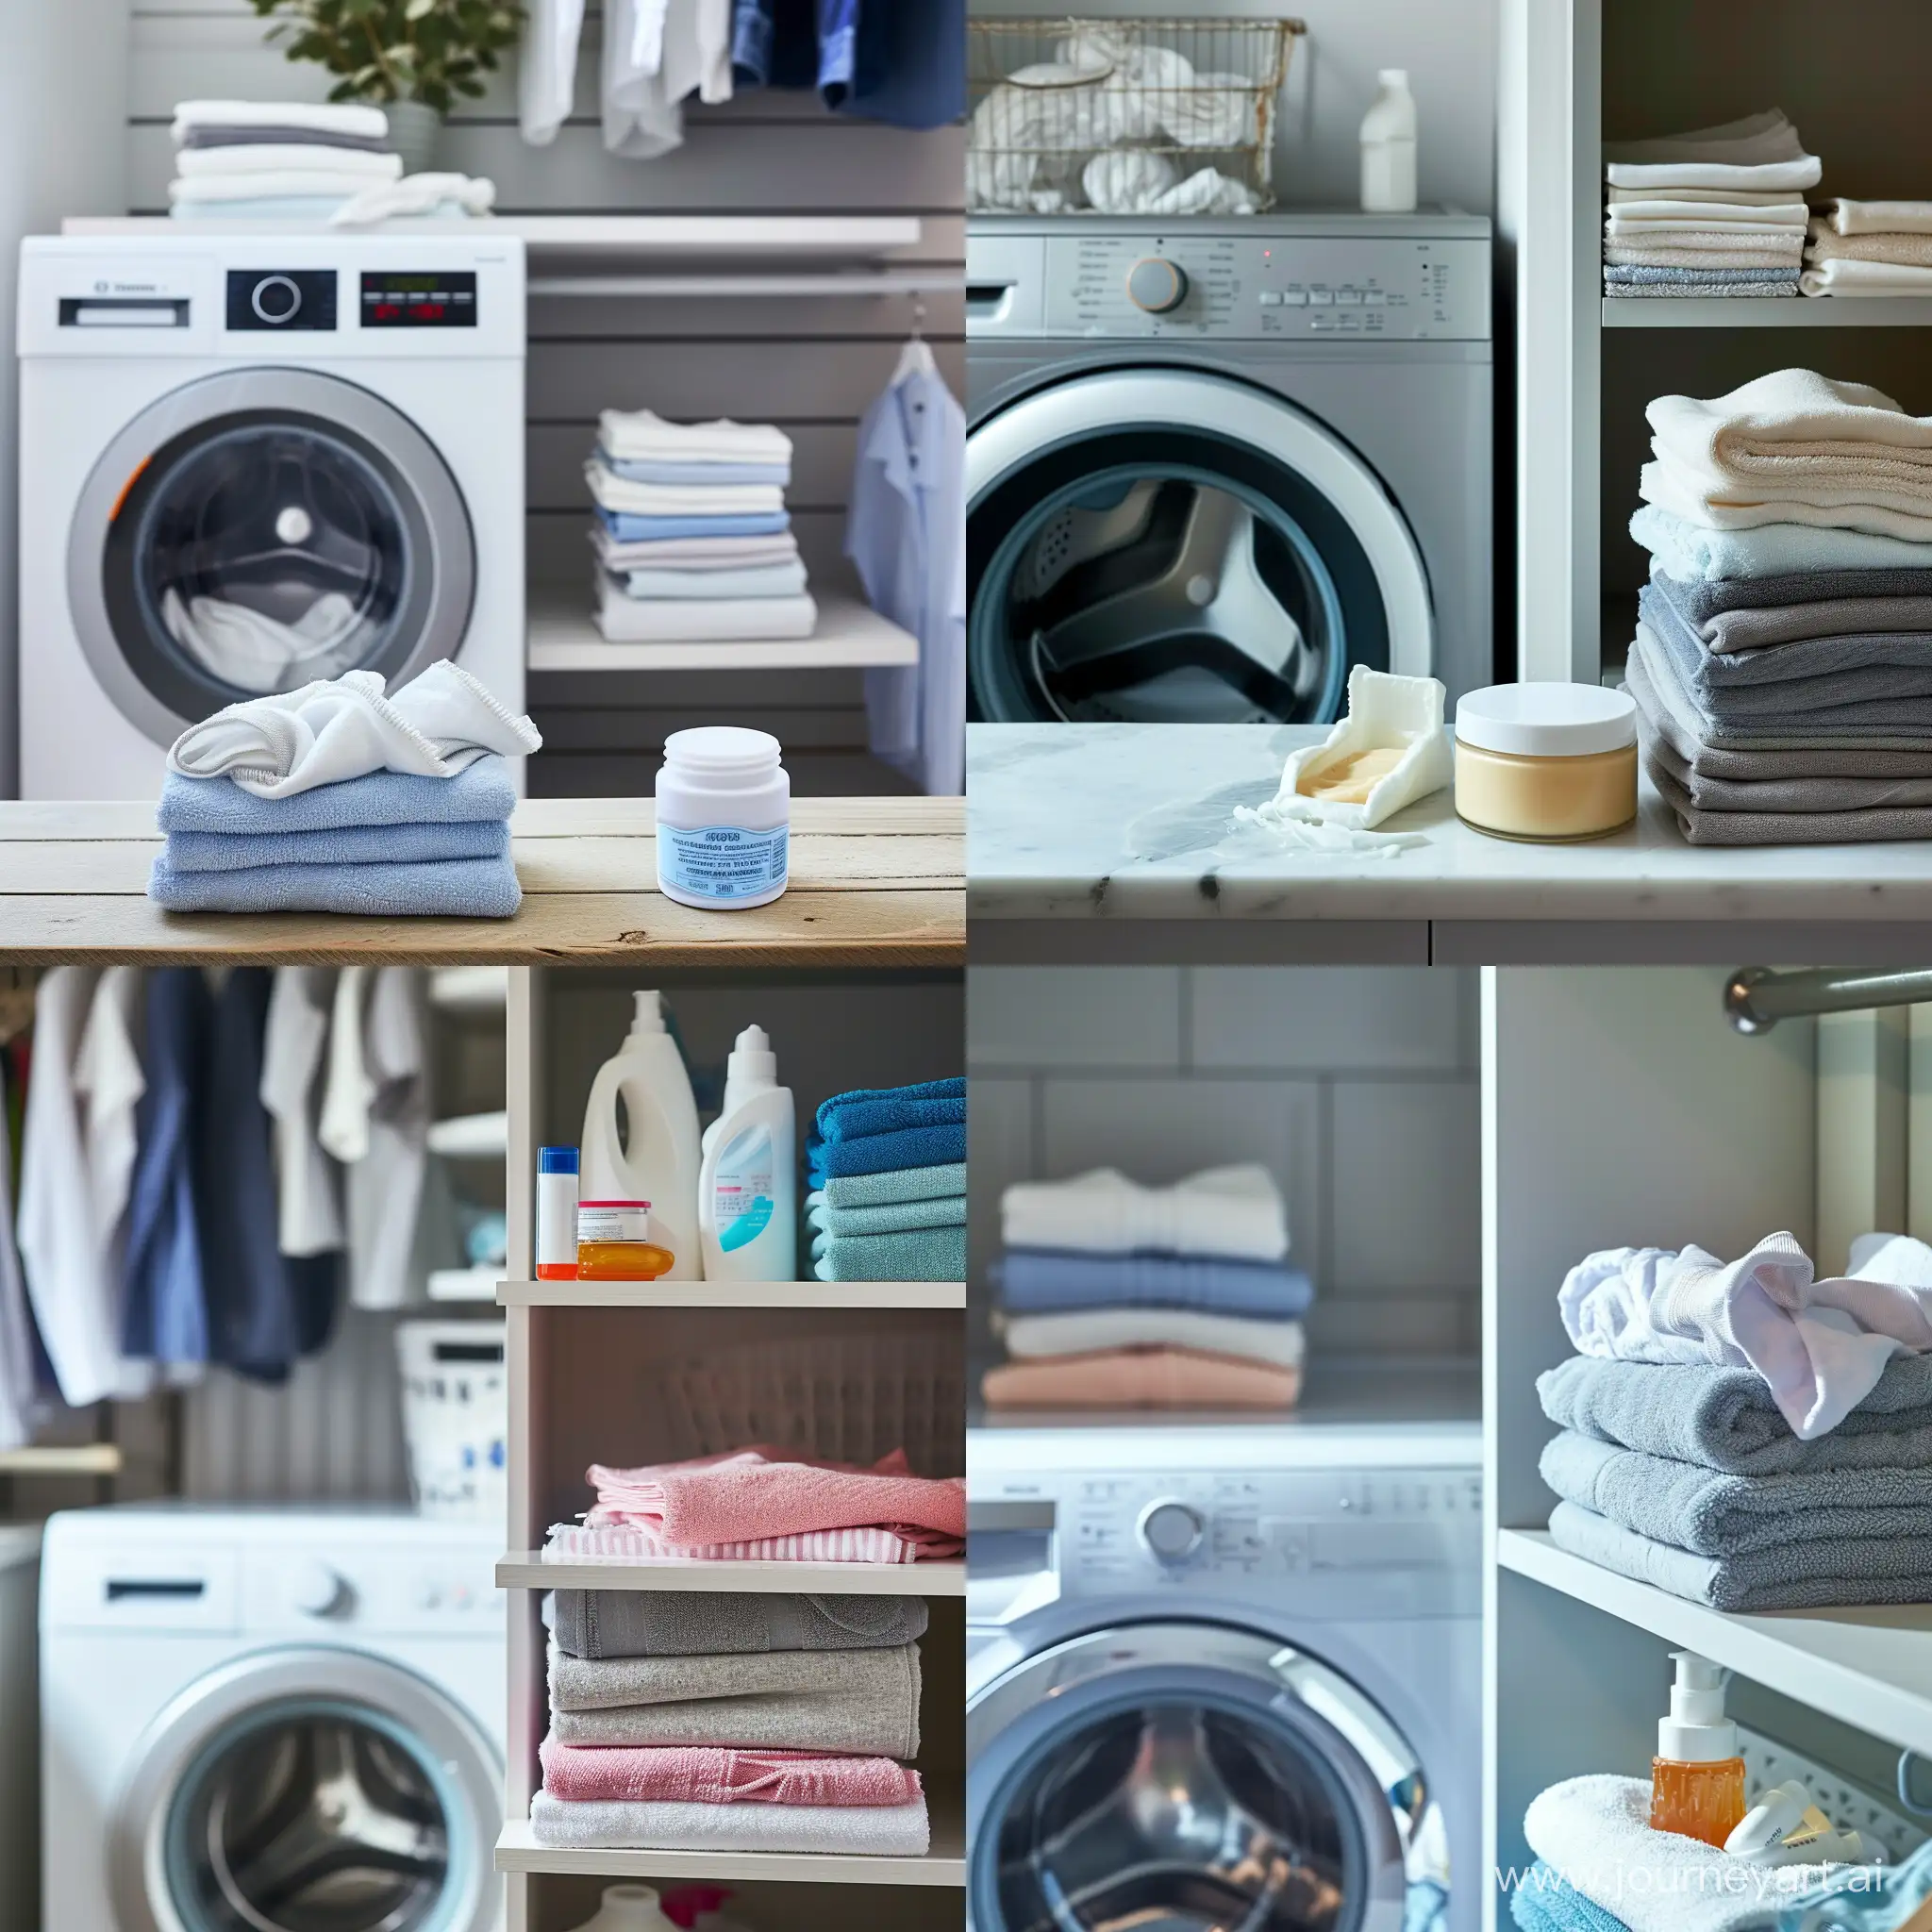 Efficient-Laundry-Day-Working-Washing-Machine-with-Neatly-Stacked-Clothes